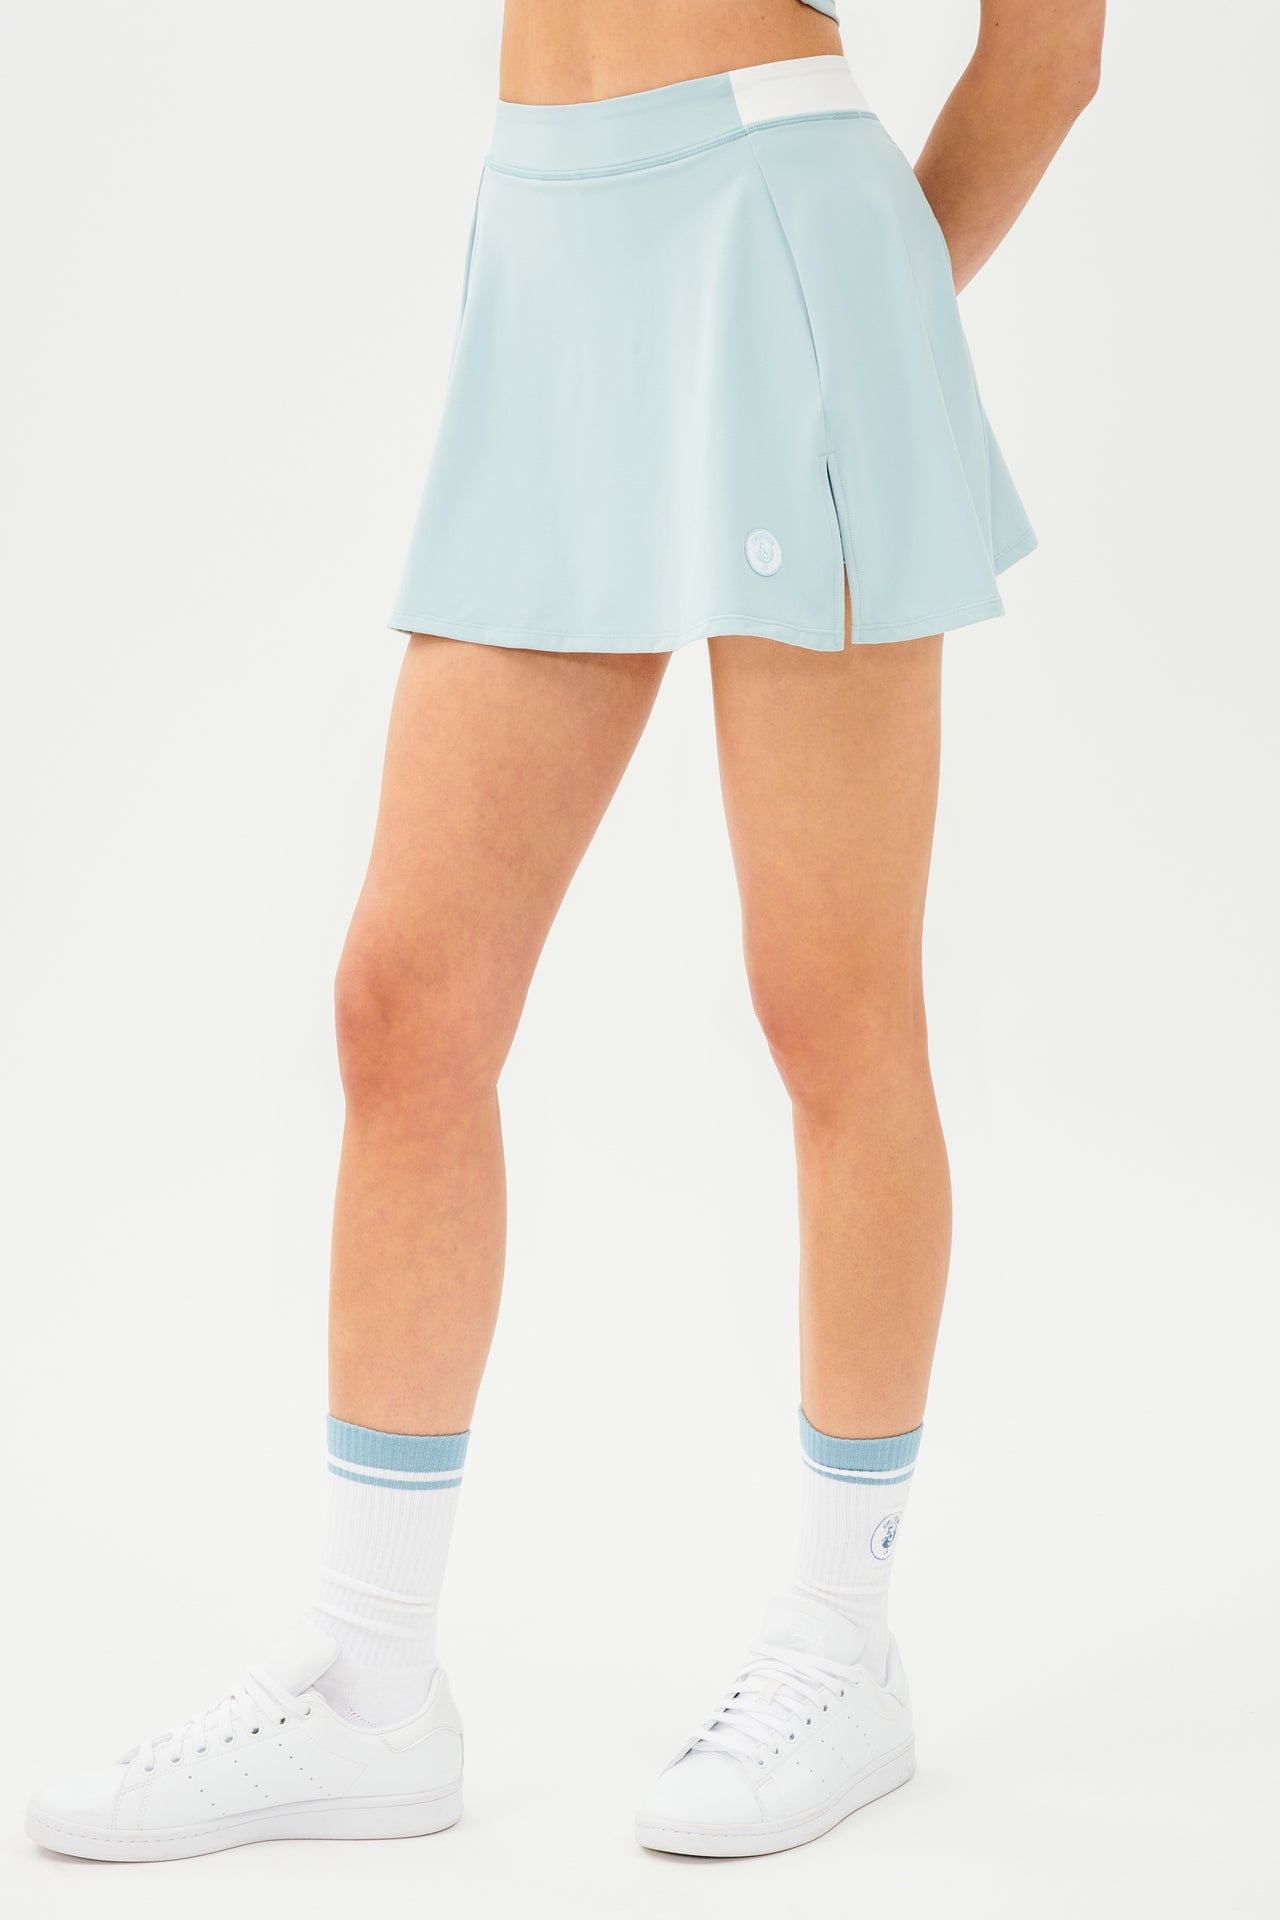 Front side view of teal skort with white details on the waistband. Model is wearing white socks with teal stripe and all white shoes